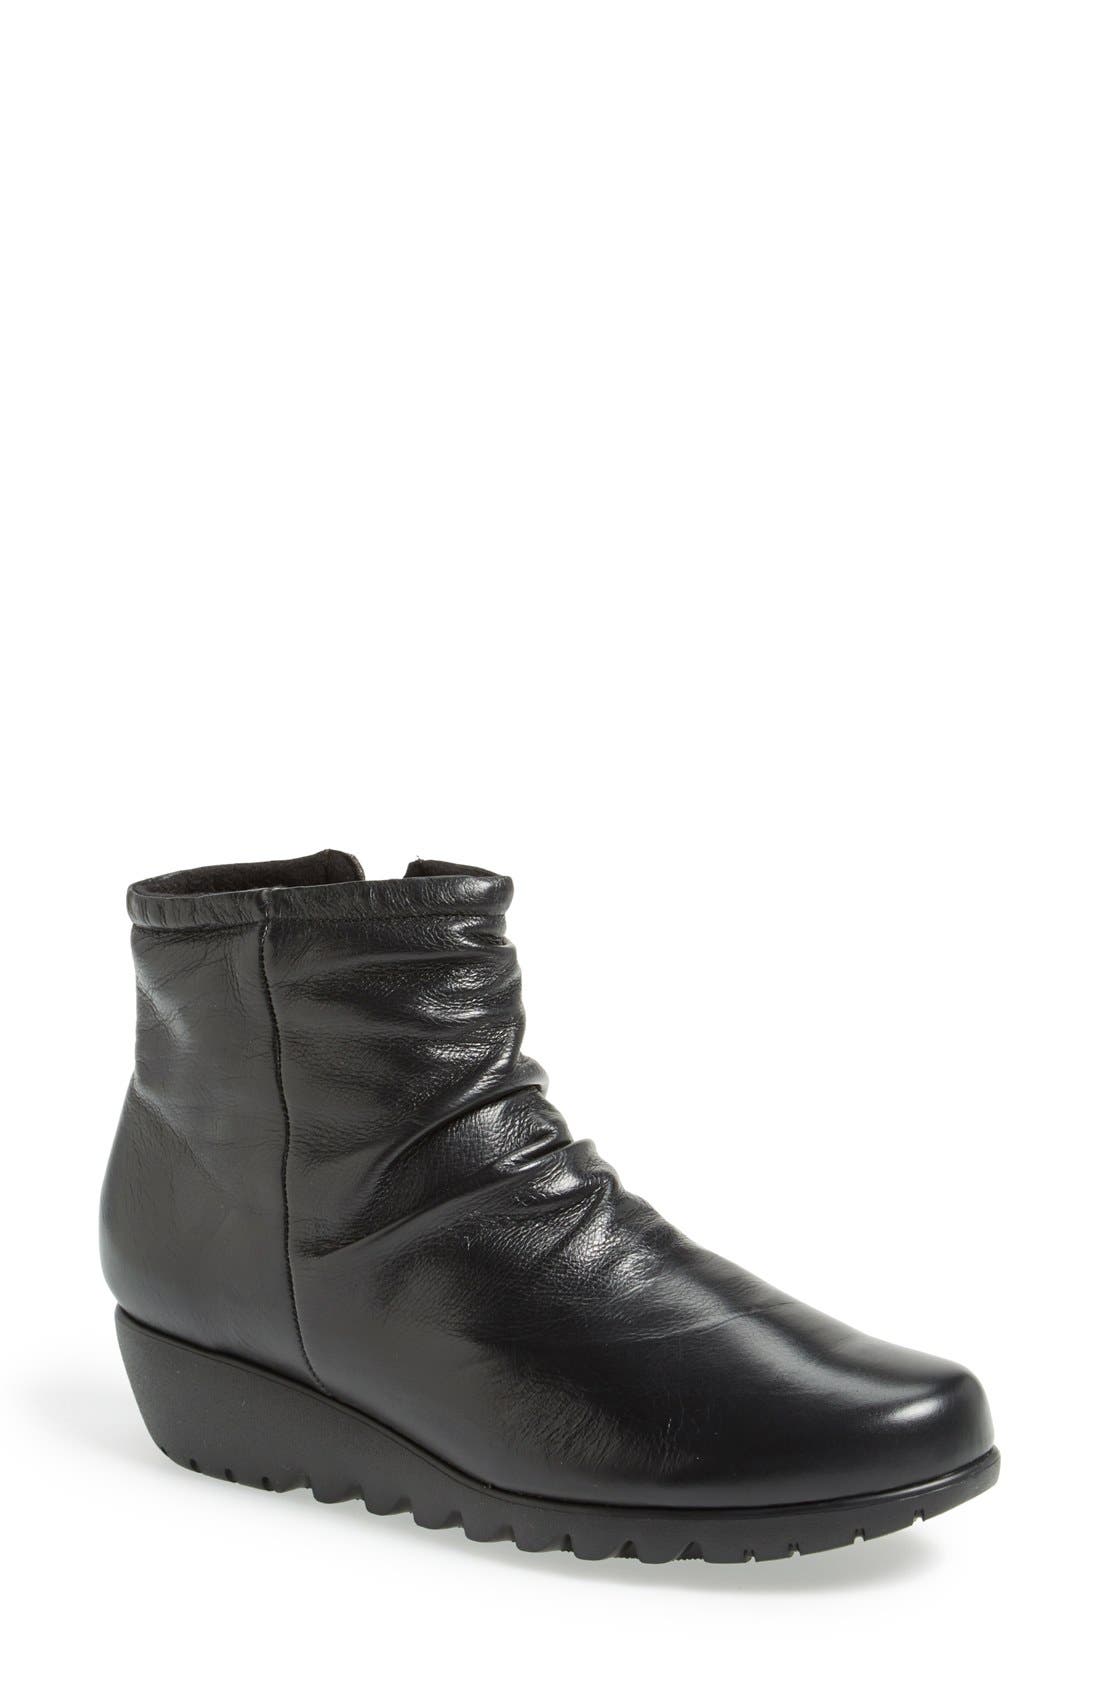 munro boots nordstrom